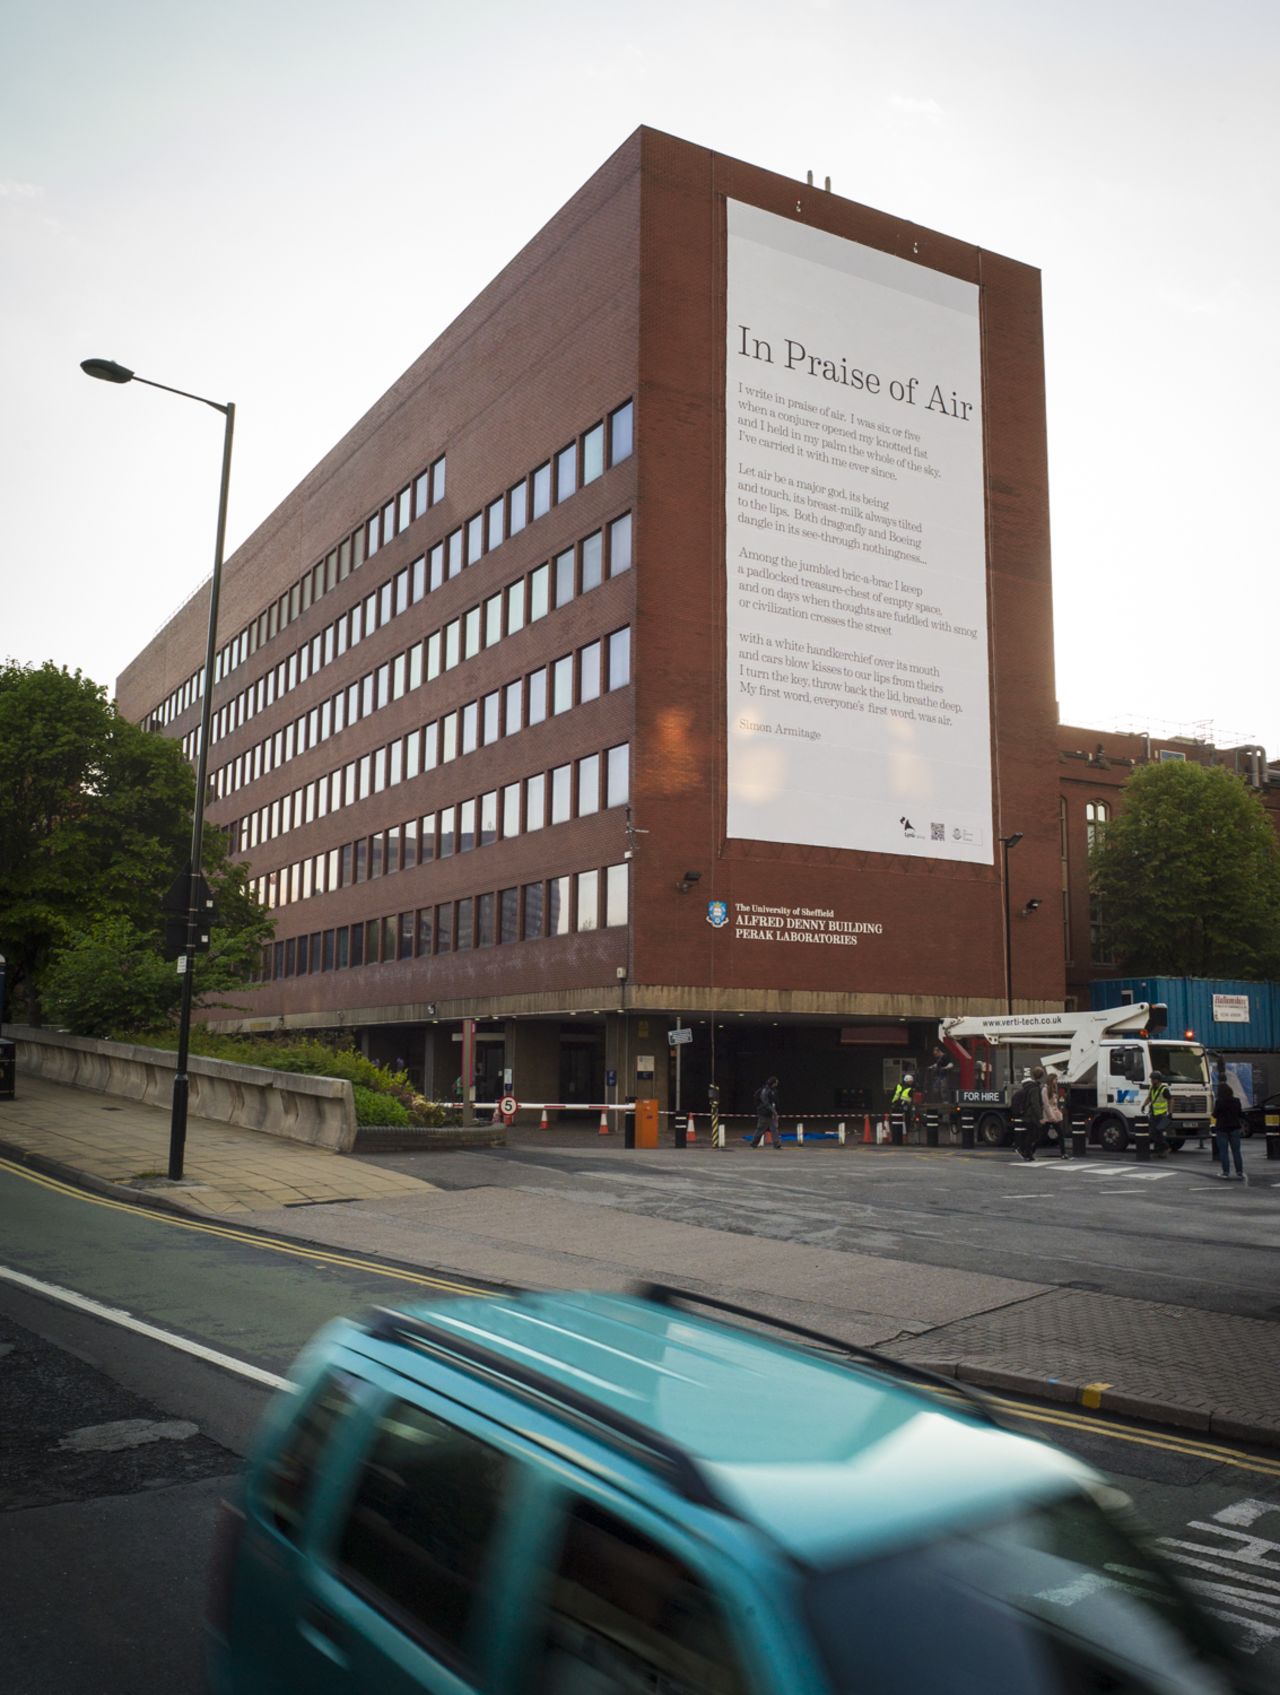 Simon Armitage's poem "In Praise of Air" in Sheffield is printed on a banner coated with titanium dioxide nano-particles that can neutralize the effects of 20 cars each day.